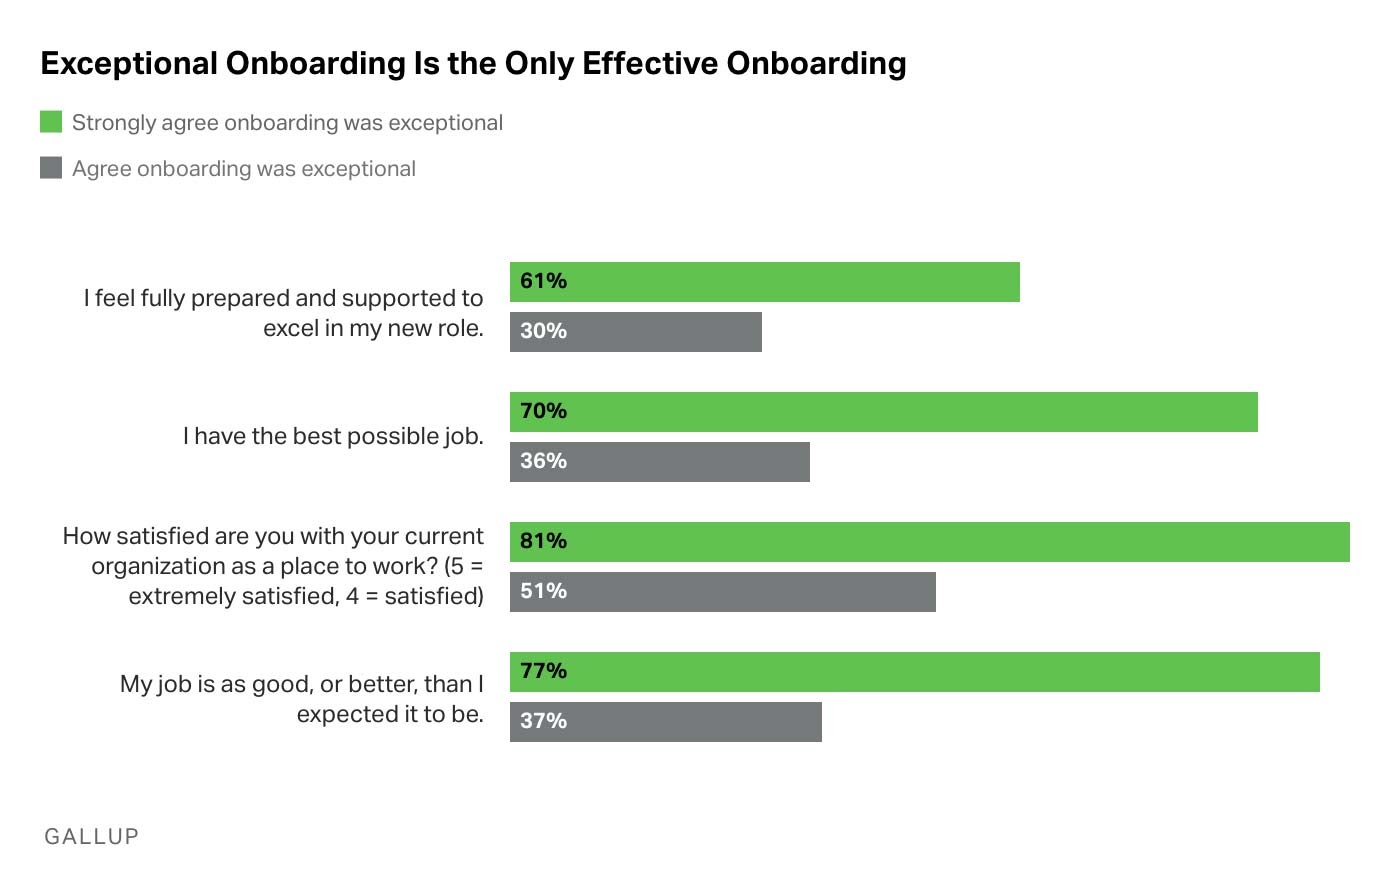 Correlation between exceptional onboarding and employee engagement